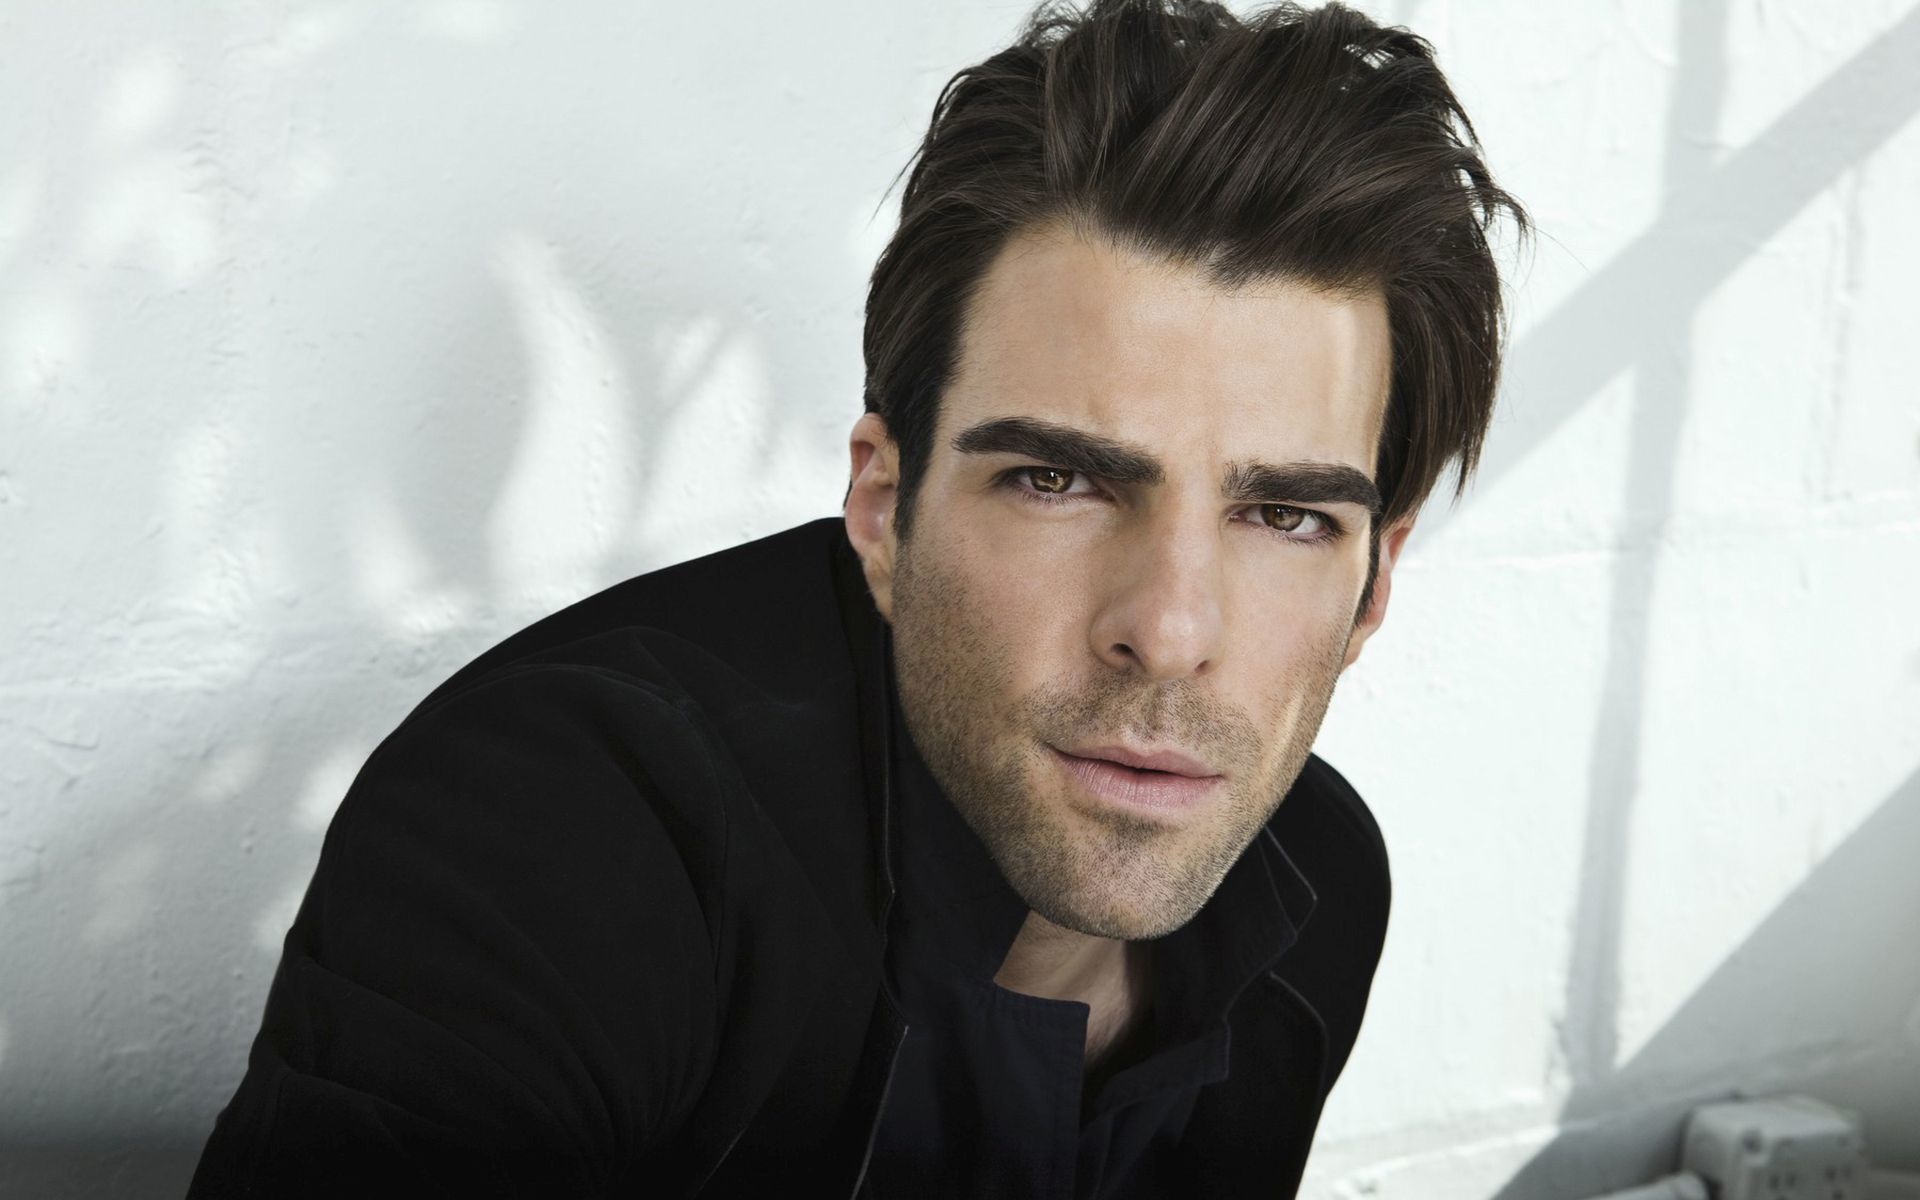 Zachary Quinto in front of a wooden wall Wallpaper 24365